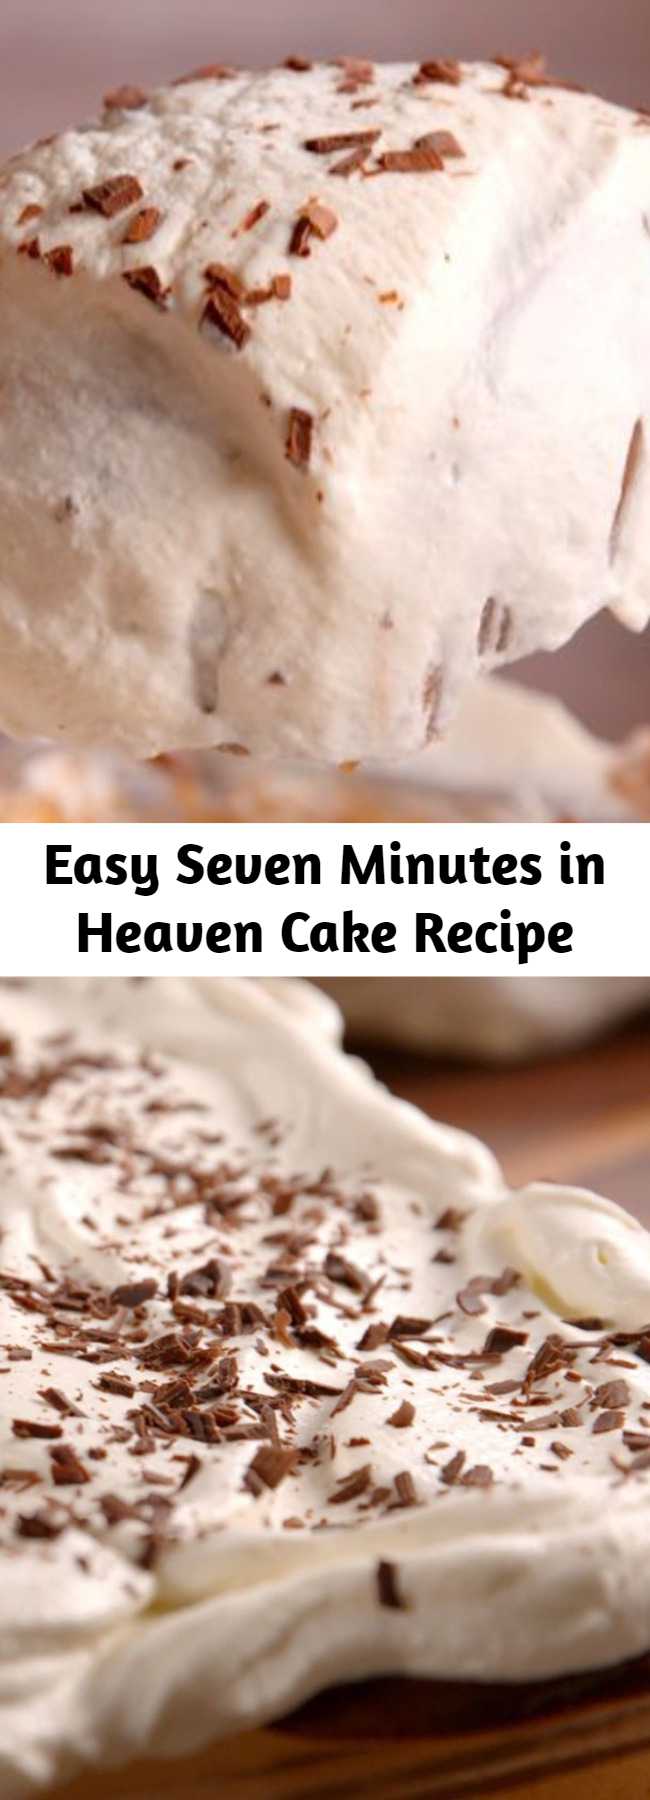 Easy Seven Minutes in Heaven Cake Recipe - Check out this seriously decadent recipe for seven minutes in heaven angel food cake.